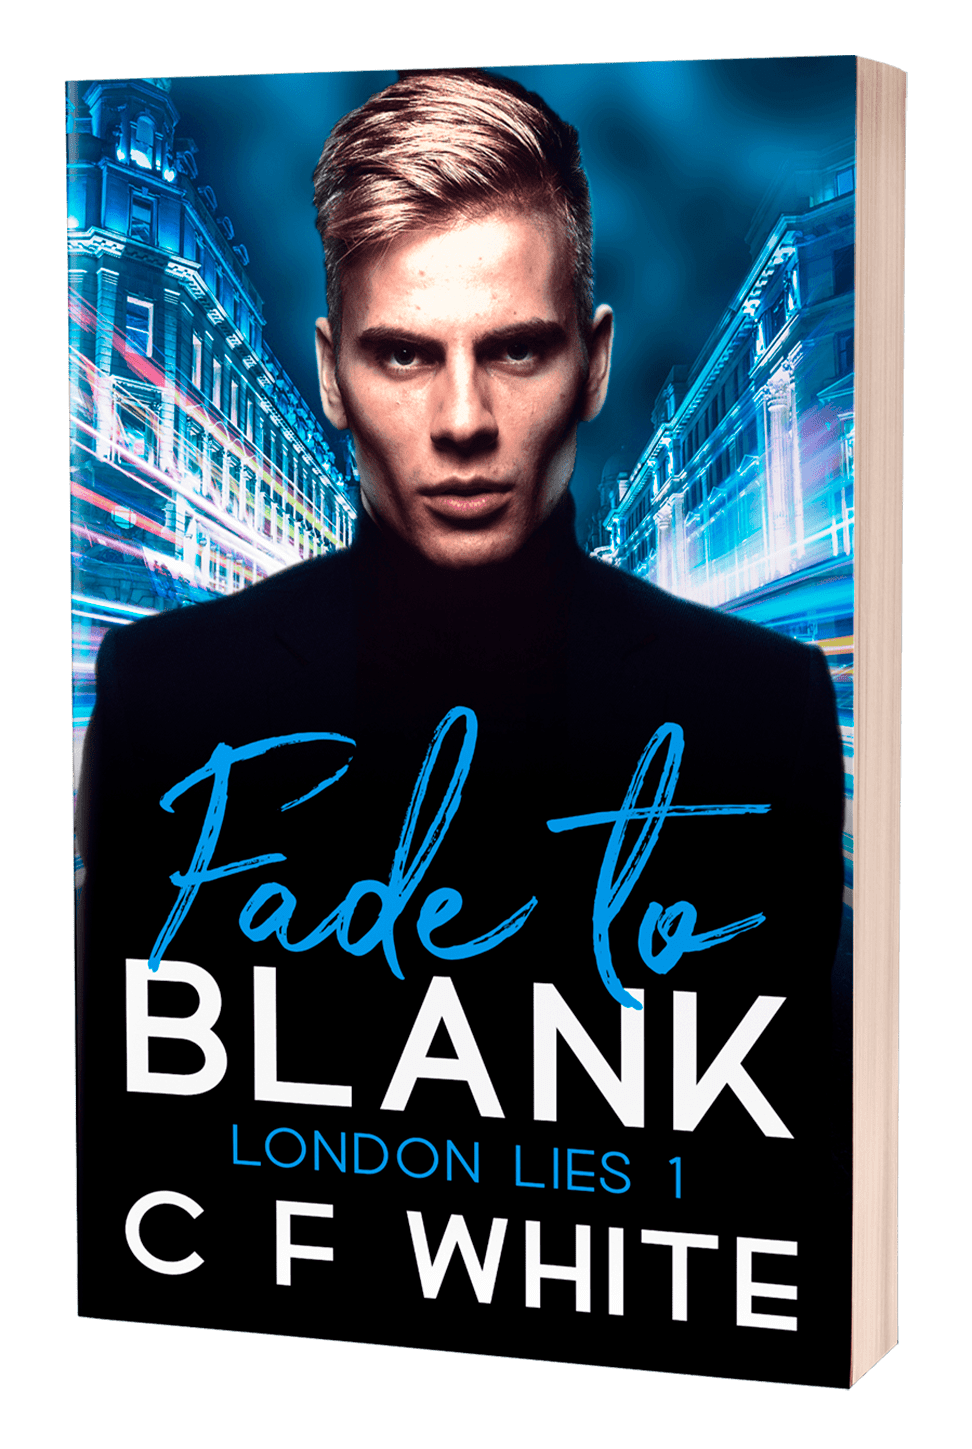 Fade to Blank book cover